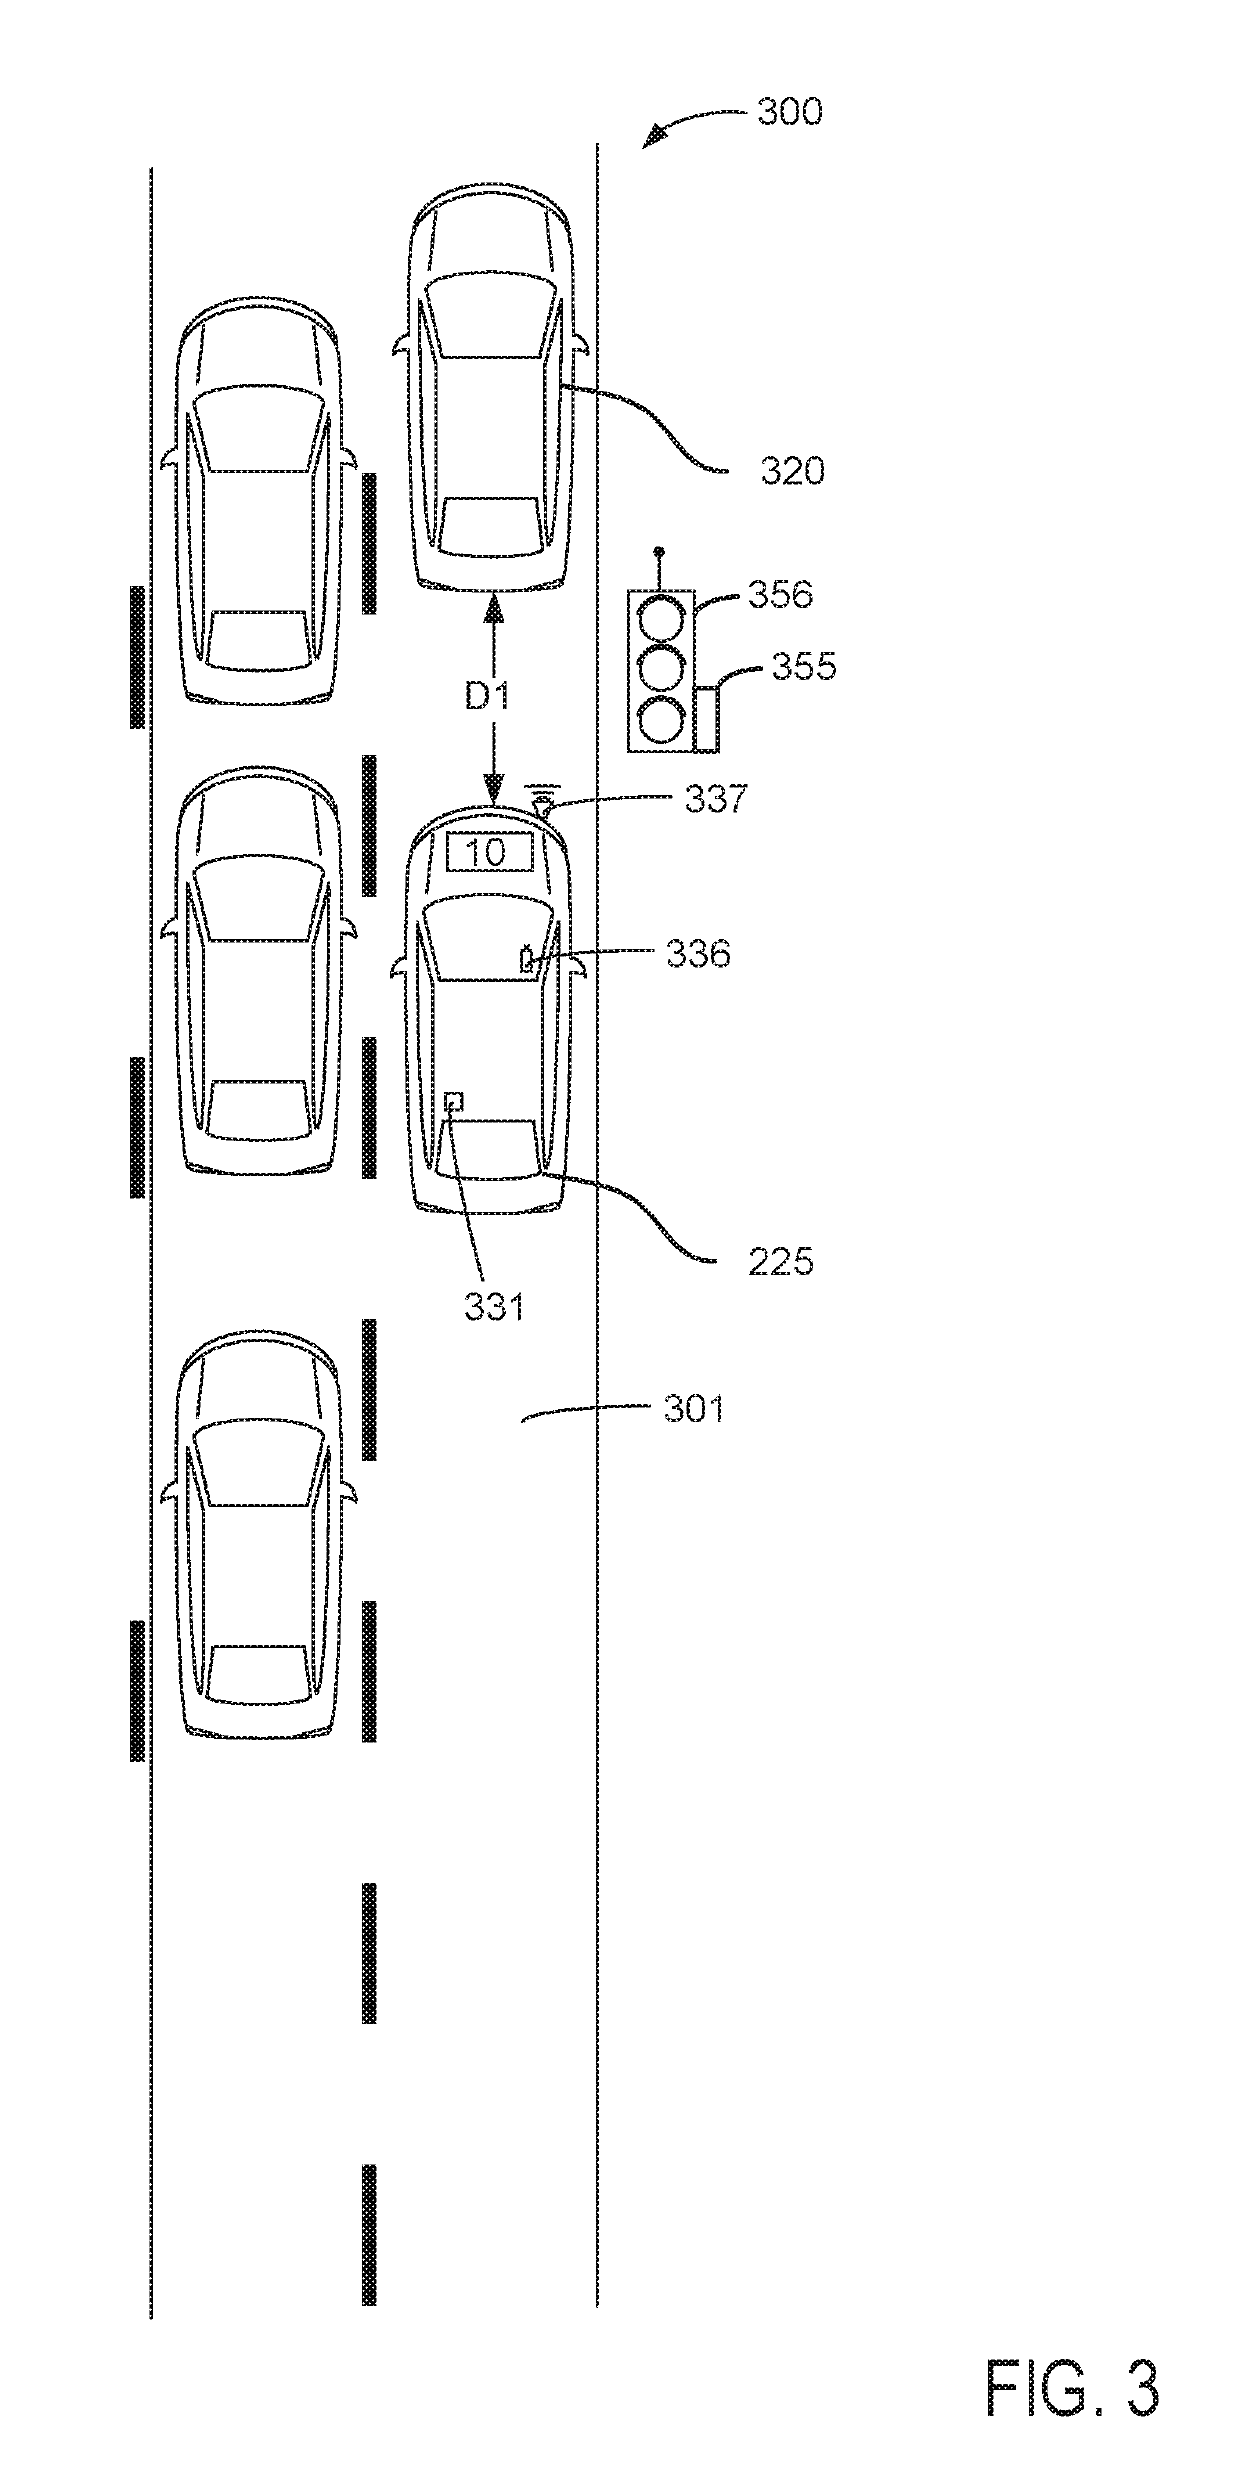 Automatic engine stopping and starting for a parked vehicle